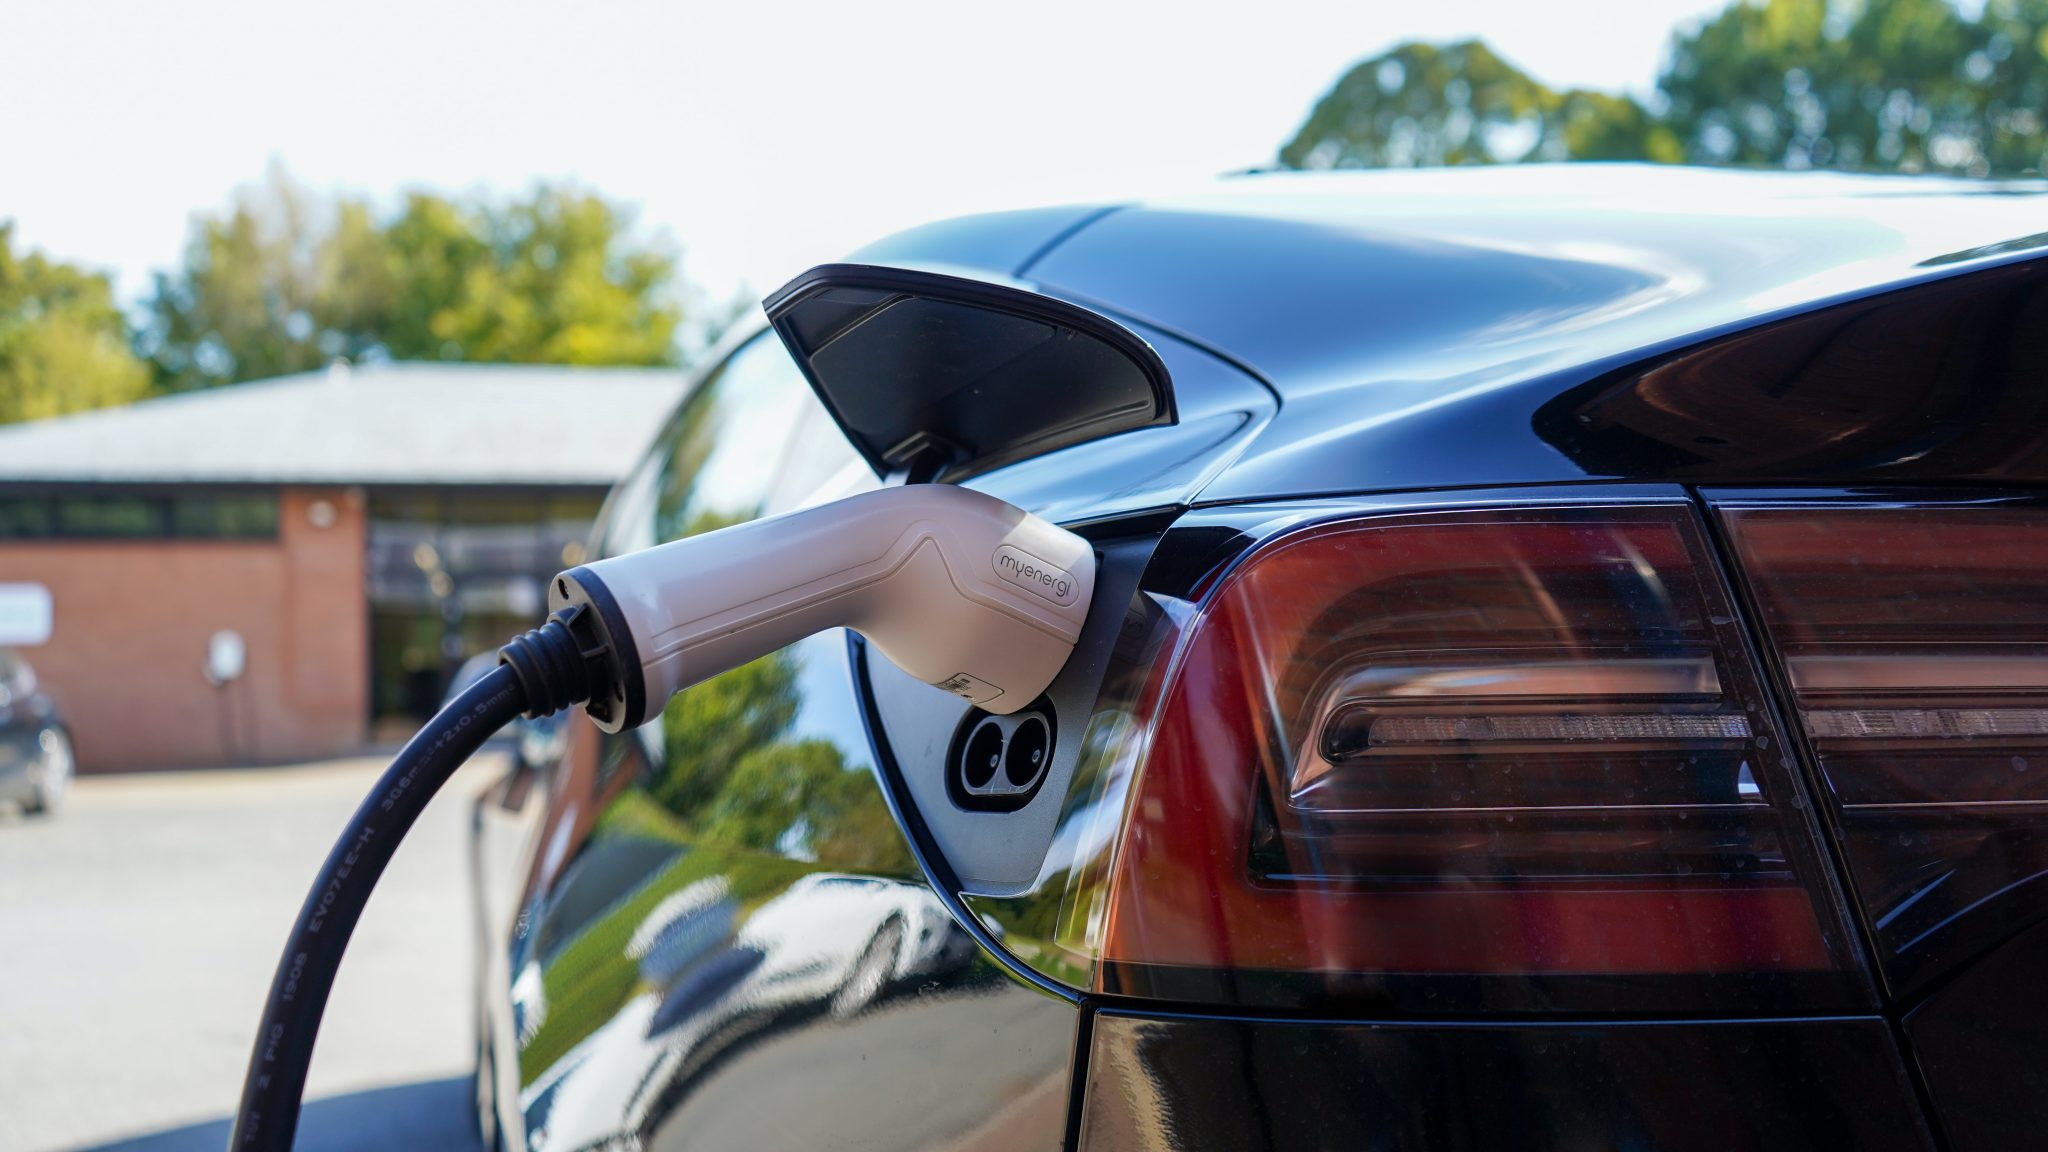 Why Do Conservatives Hate Electric Cars? Exploring the Possible Reasons